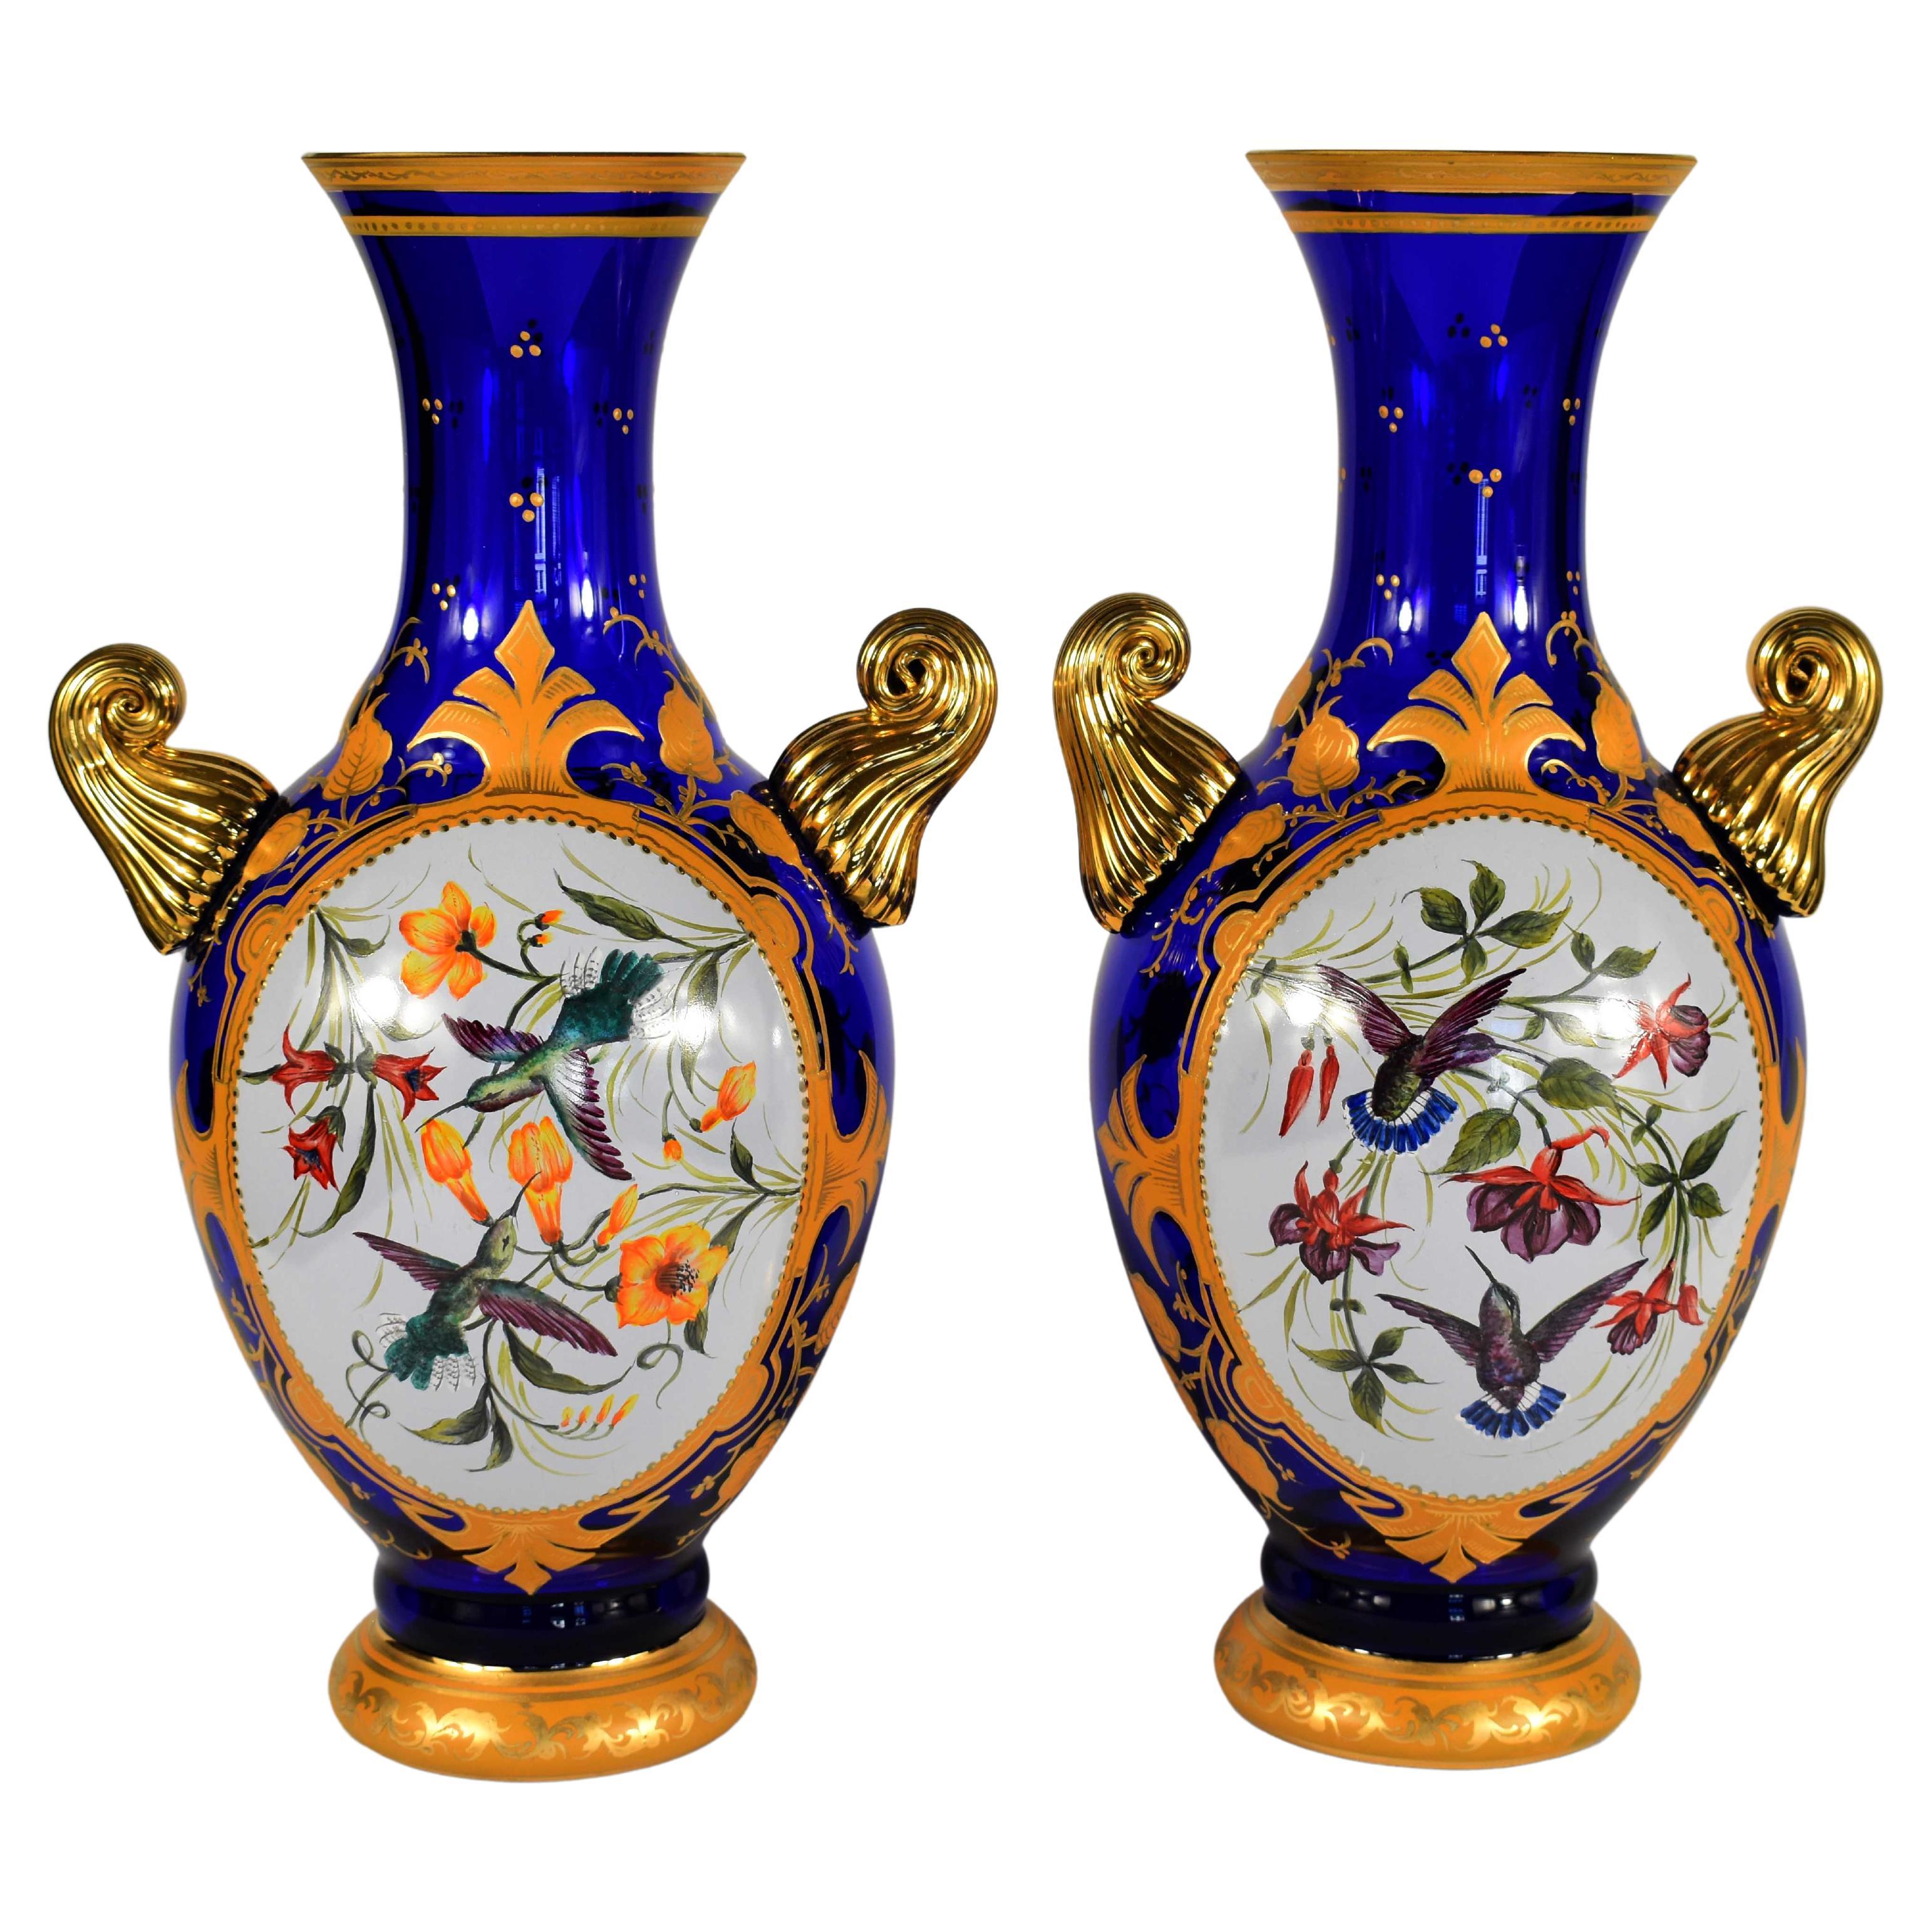 Pair of Blue Hand-Painted and Gilded Vases, Bohemian Glass 20h Century For Sale